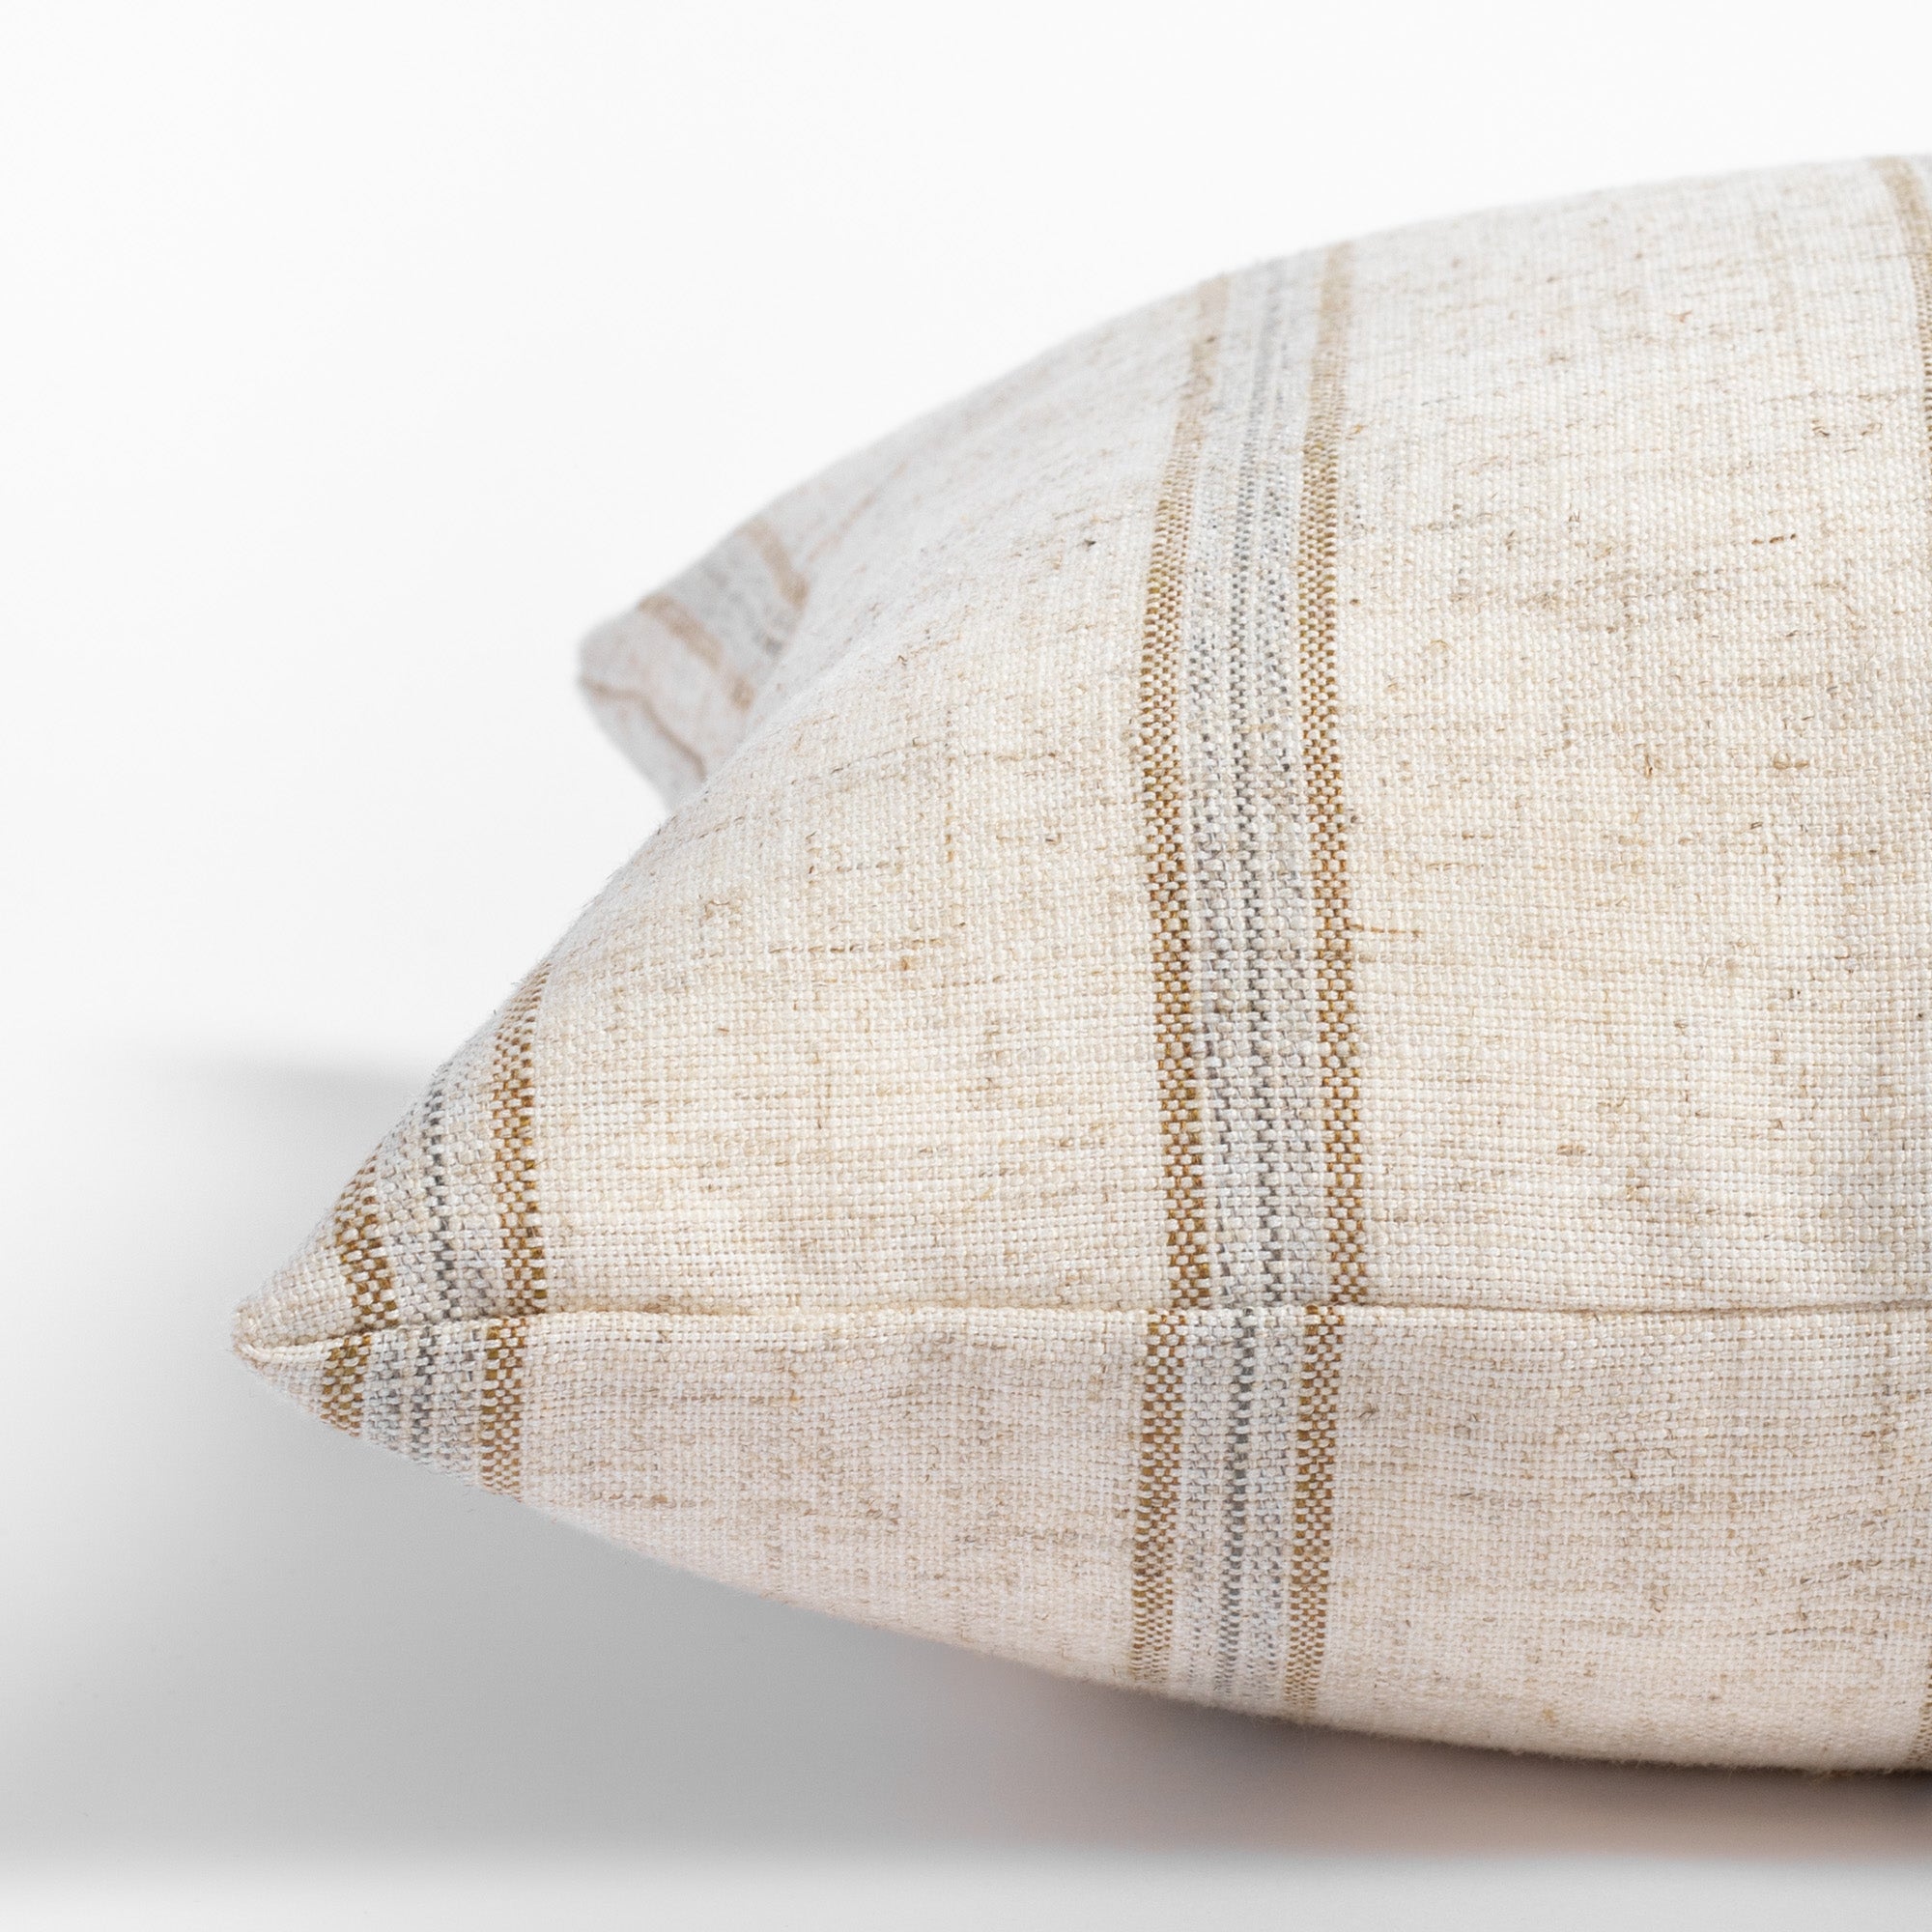 Yarmouth Stripe Sandstone, a beige lumbar pillow with golden sand and grey vertical stripes : close up side view